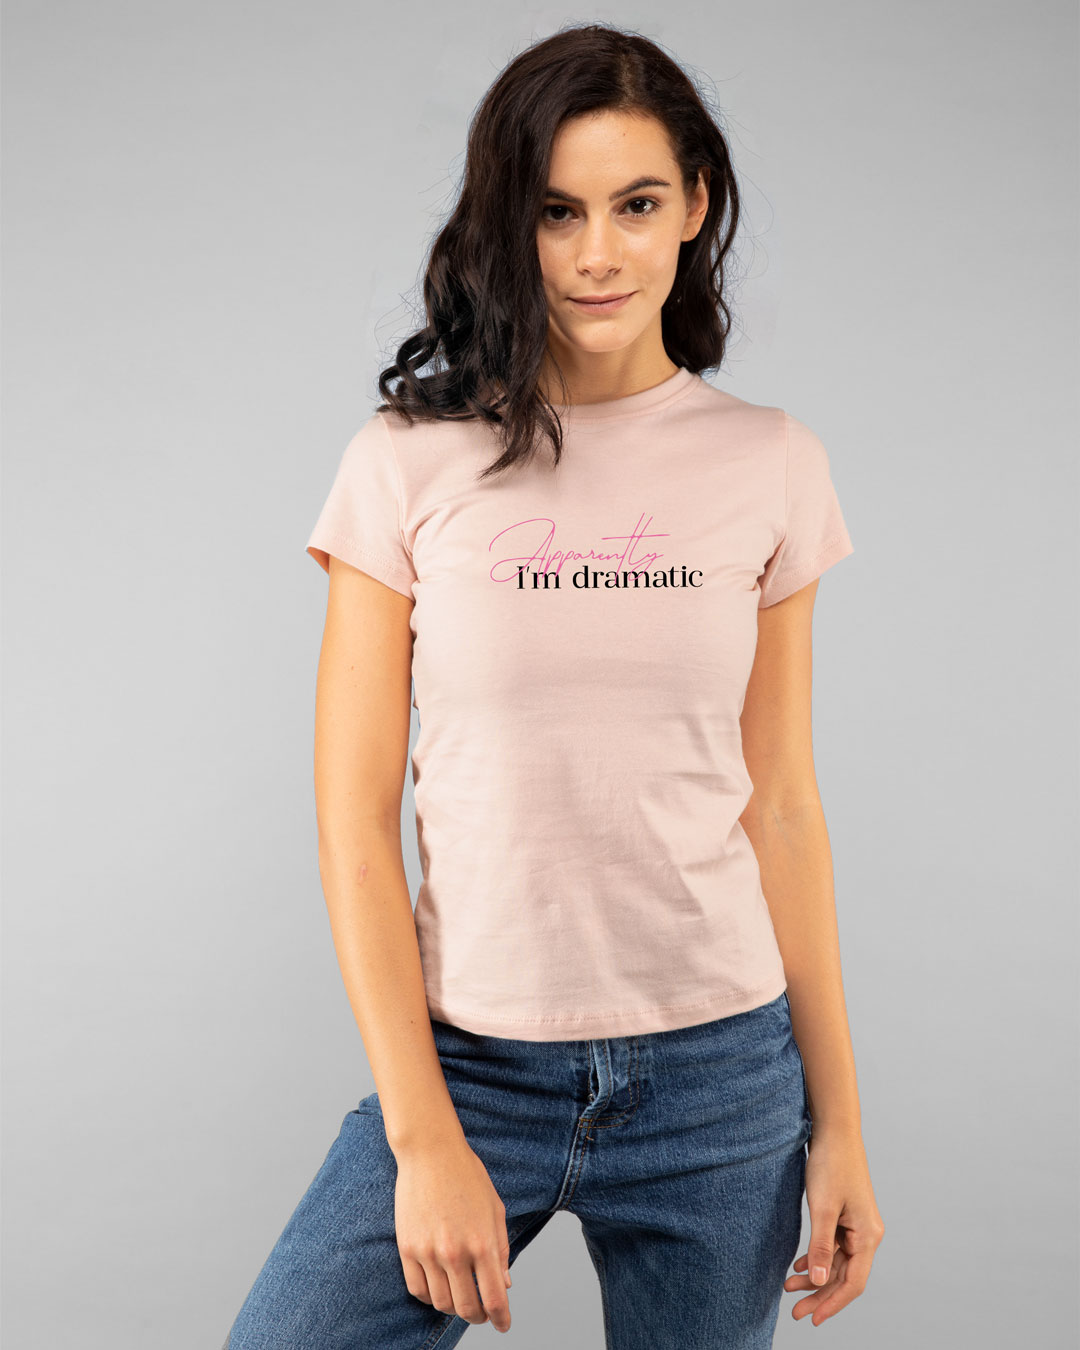 Shop Apparently Dramatic Half Sleeve Printed T-Shirt Baby Pink-Back